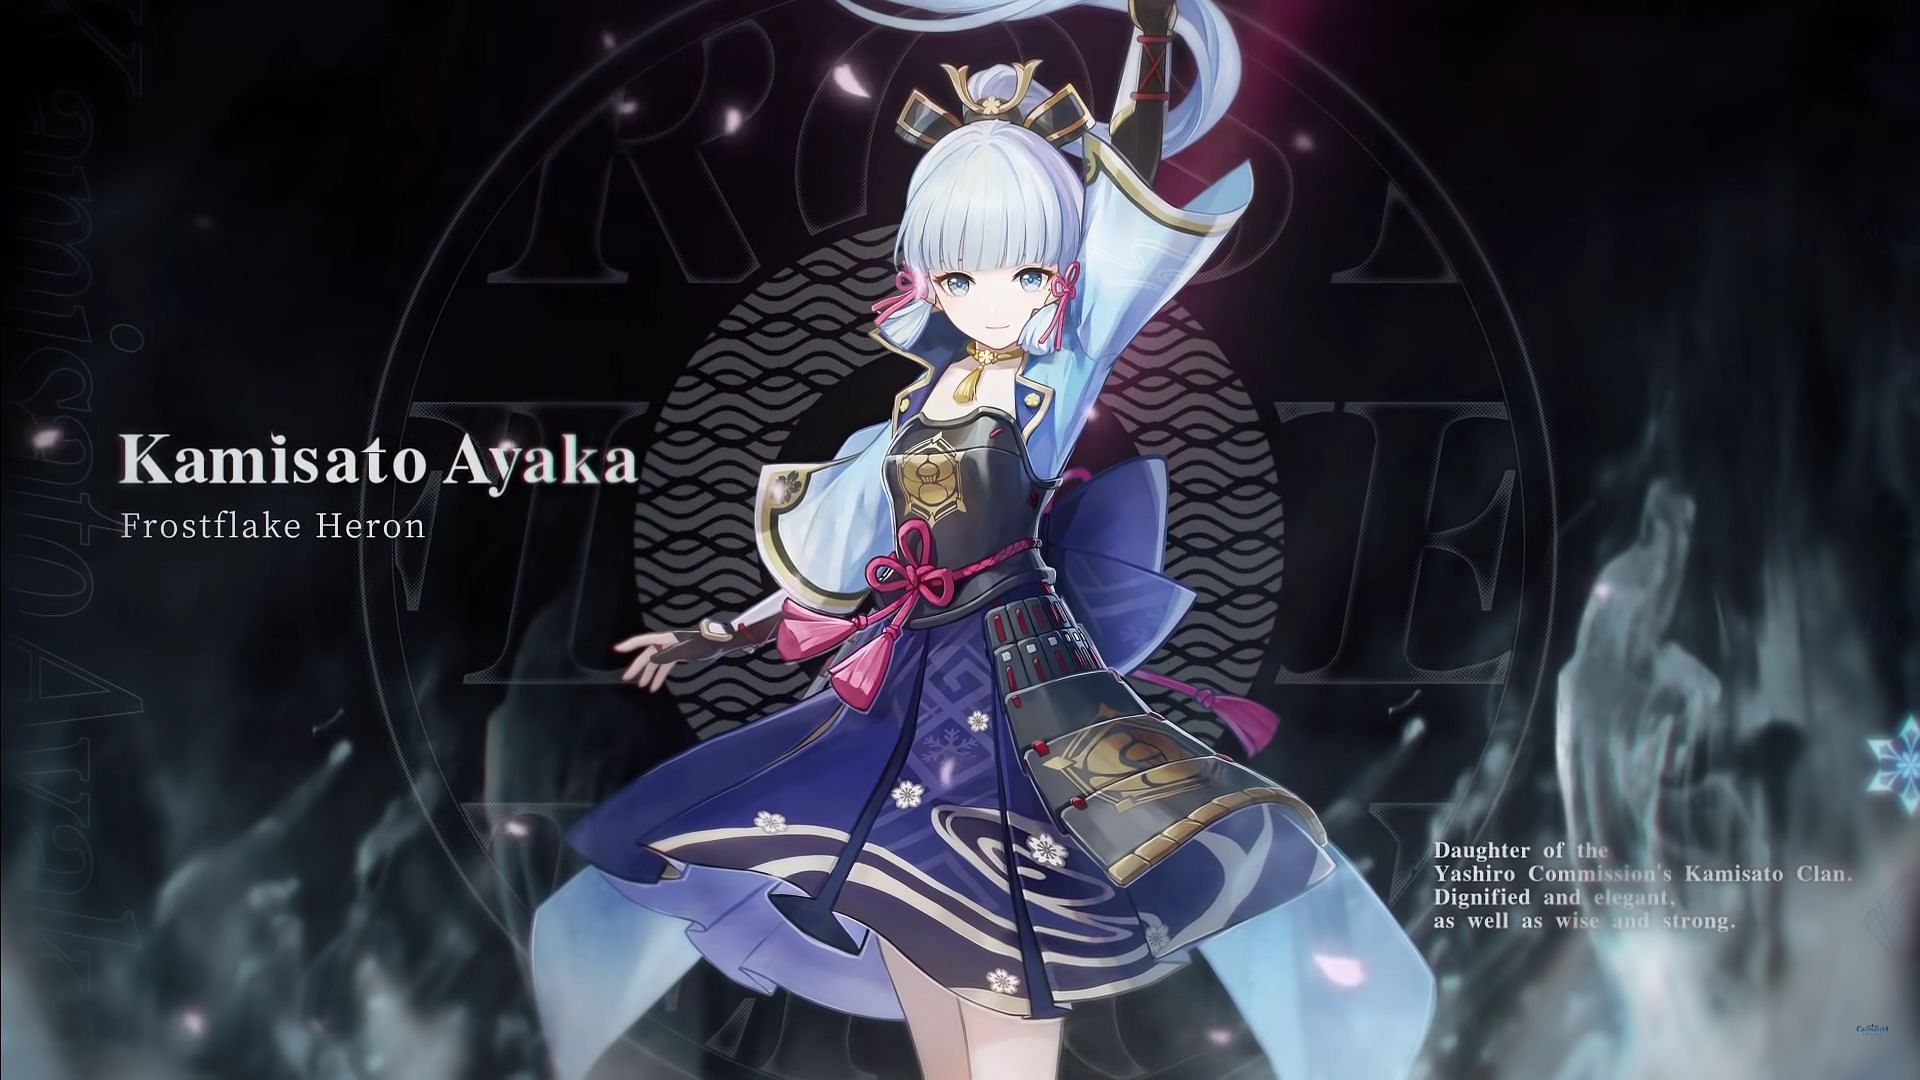 Ayaka will be in the first phase of version 4.3, as per leaks (Image via HoYoverse)